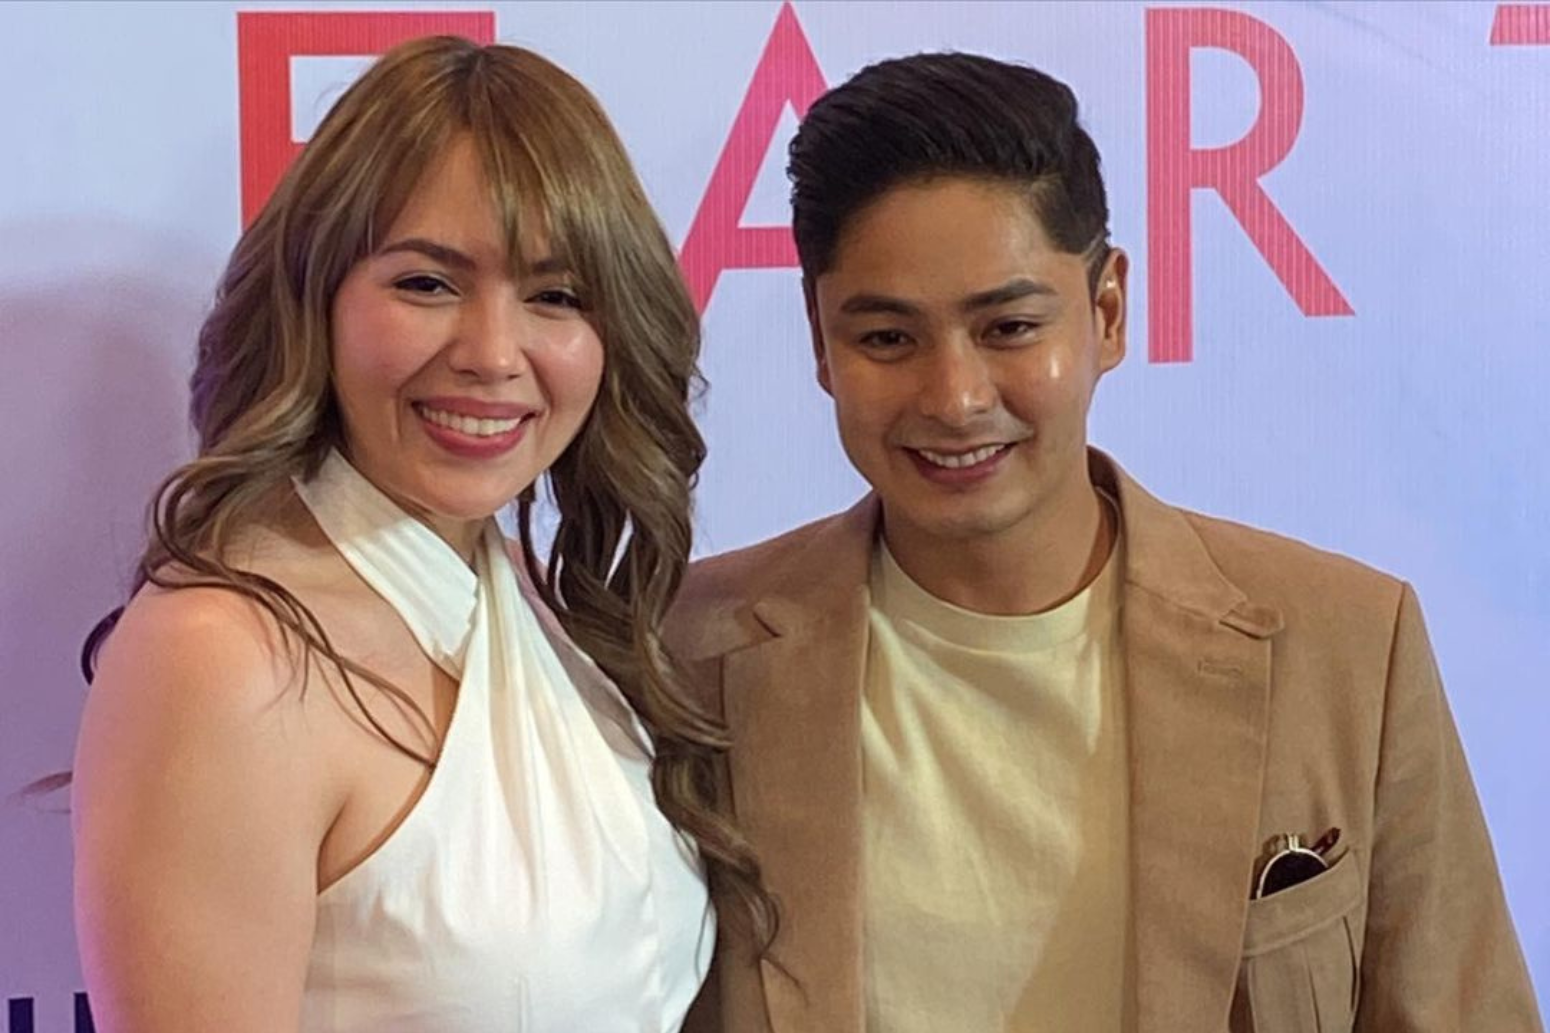 Coco Martin confirms being in a relationship with Julia Montes for 12 years